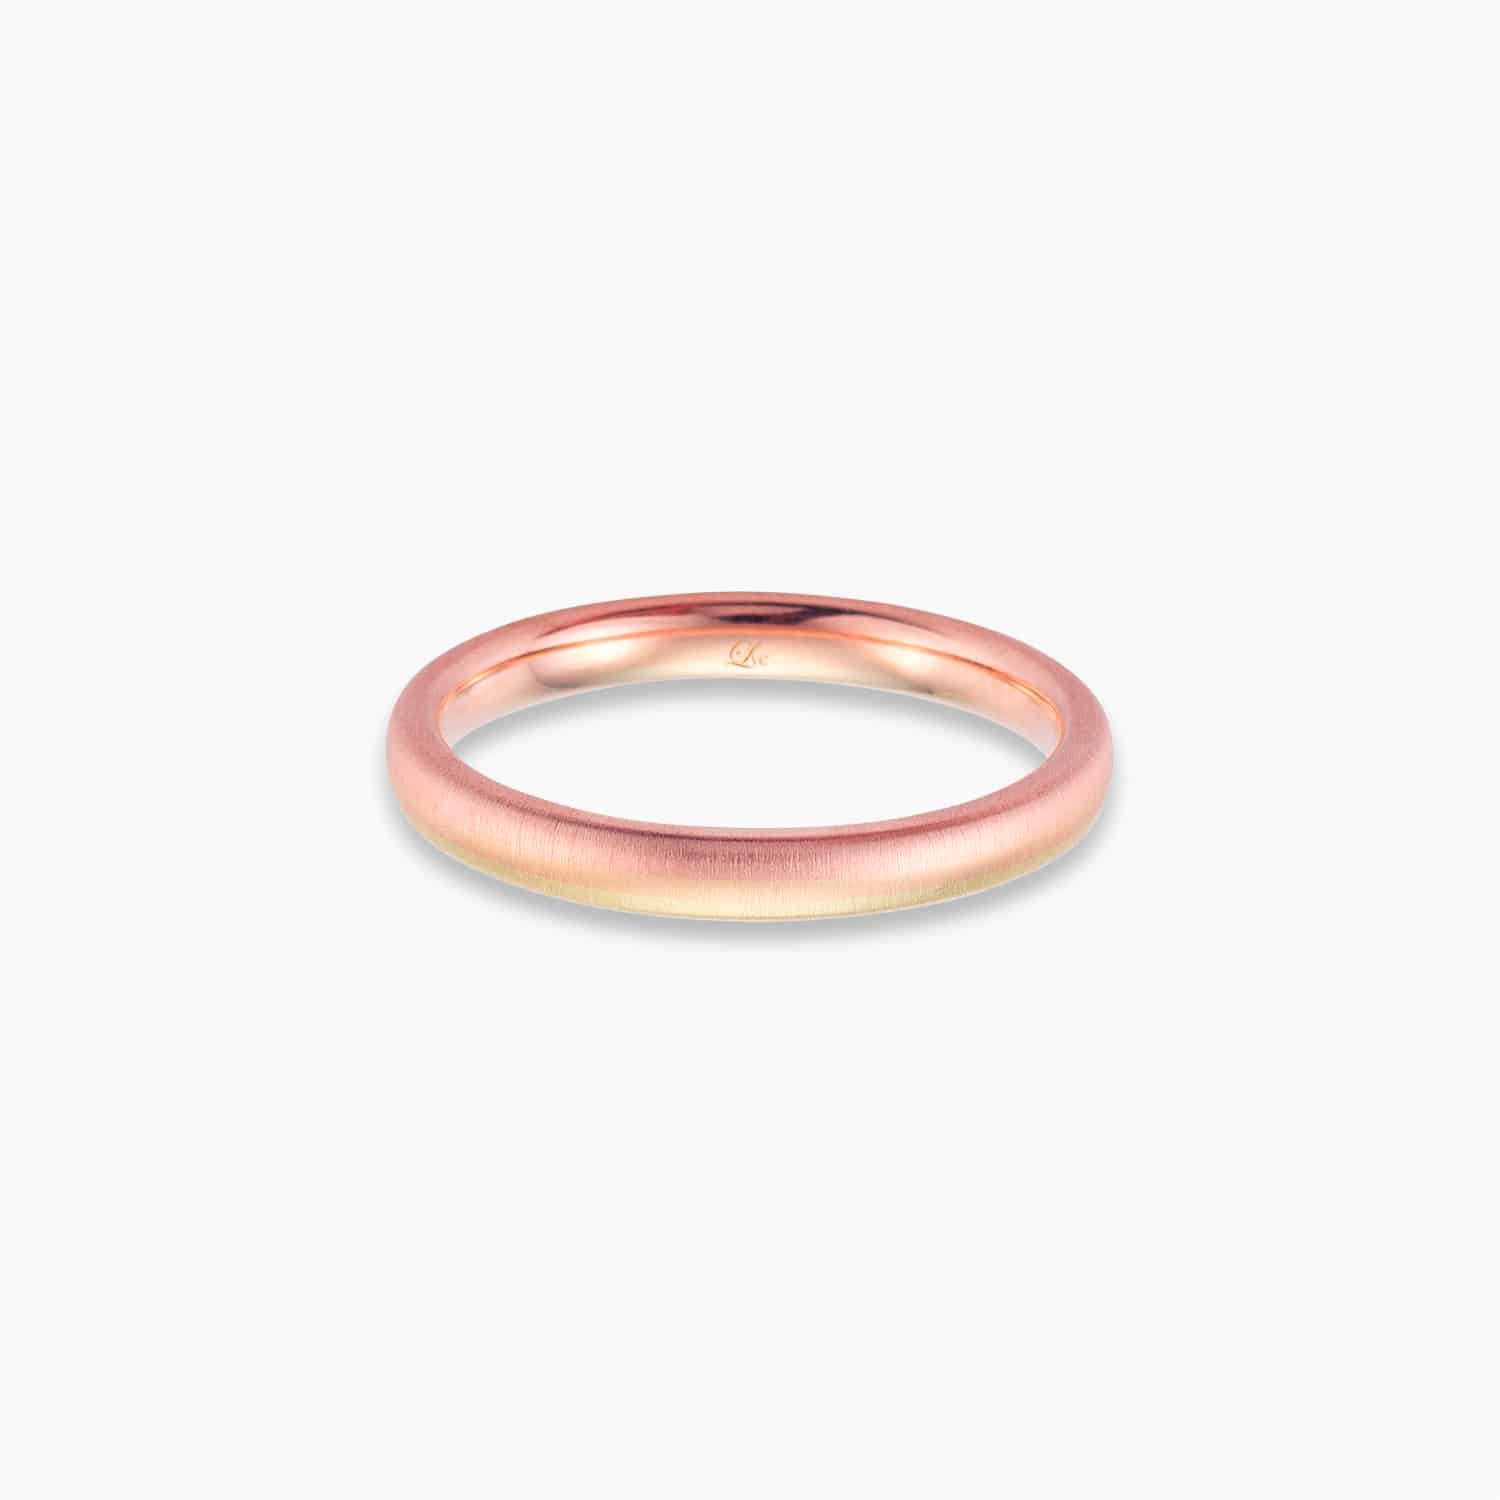 LVC SOLEIL WEDDING BAND IN YELLOW AND ROSE GOLD a wedding band for men in yellow and rose gold 金 戒指